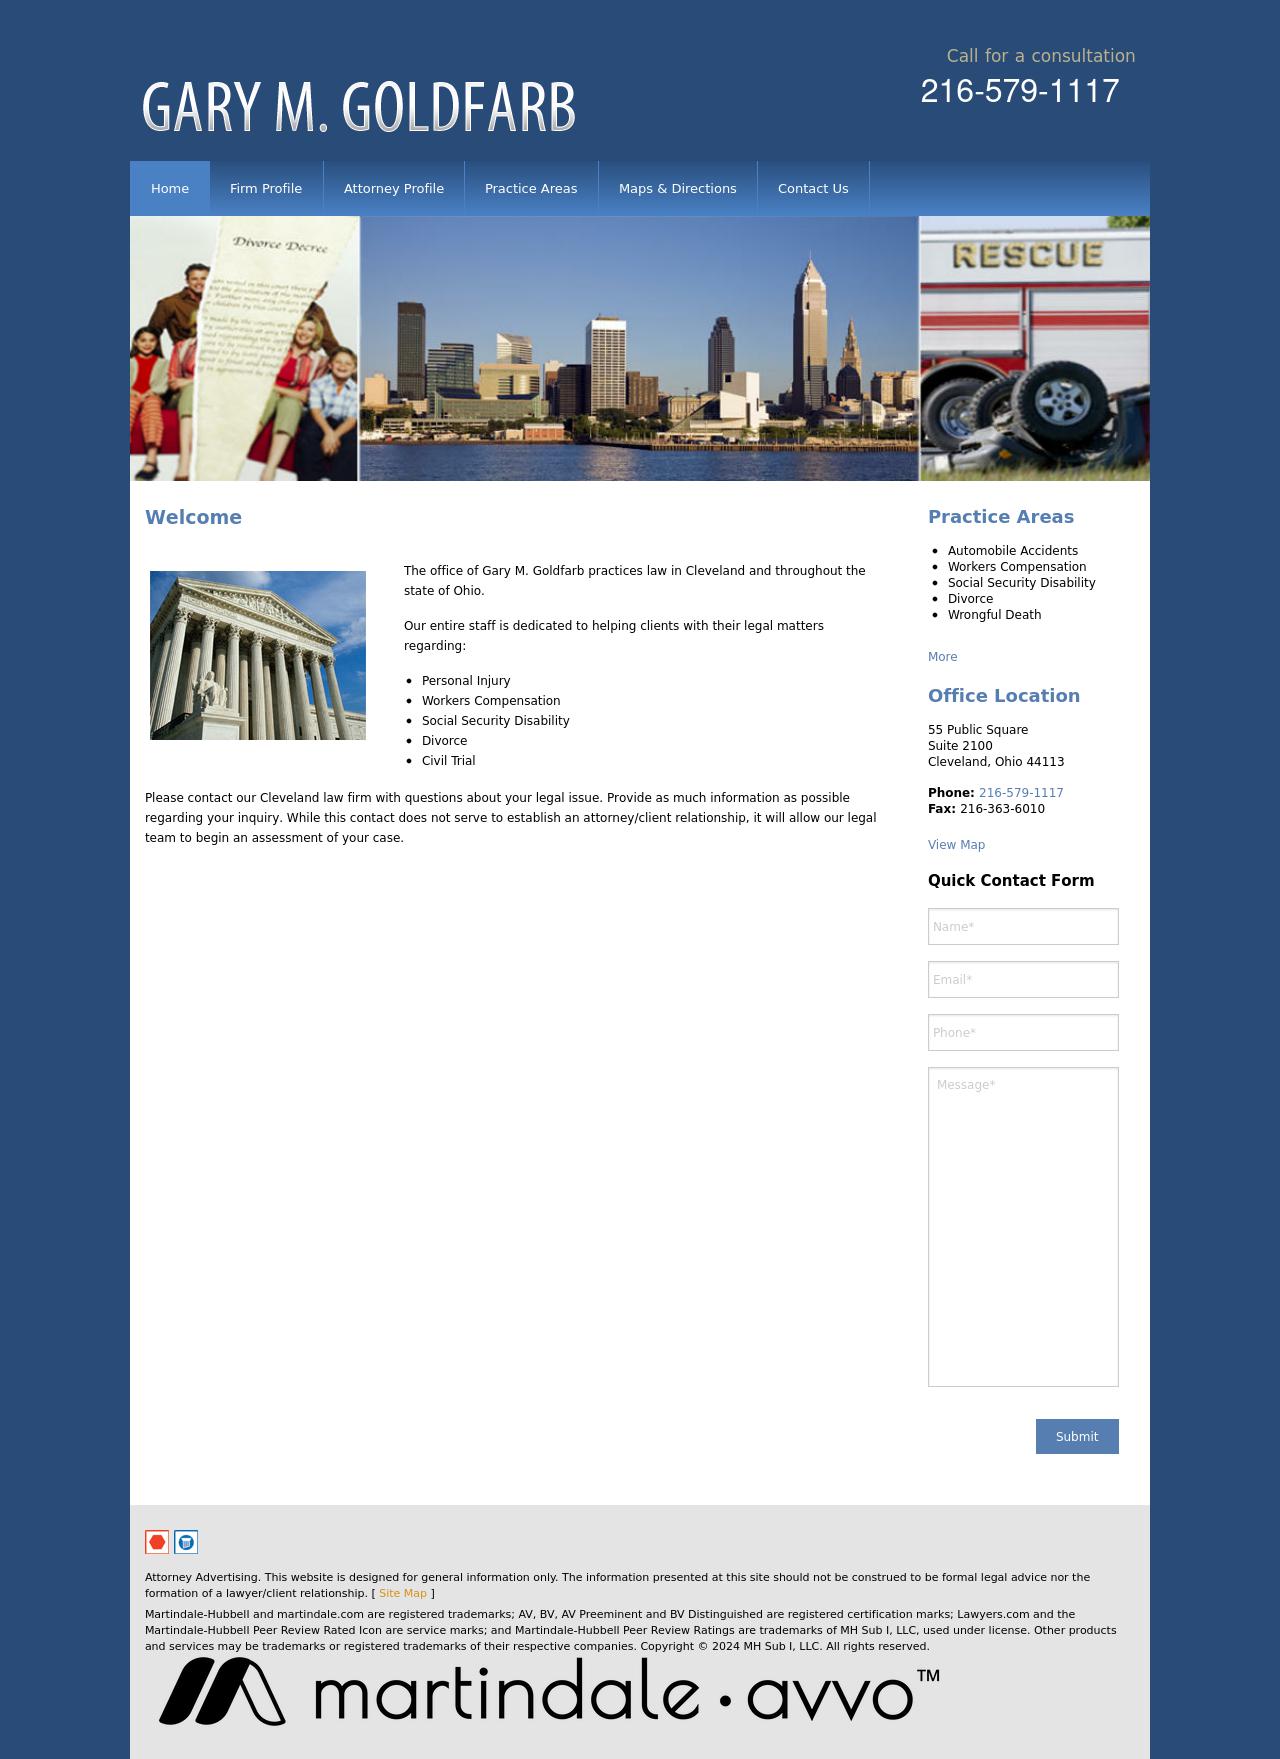 Goldfarb, Gary M - Cleveland OH Lawyers